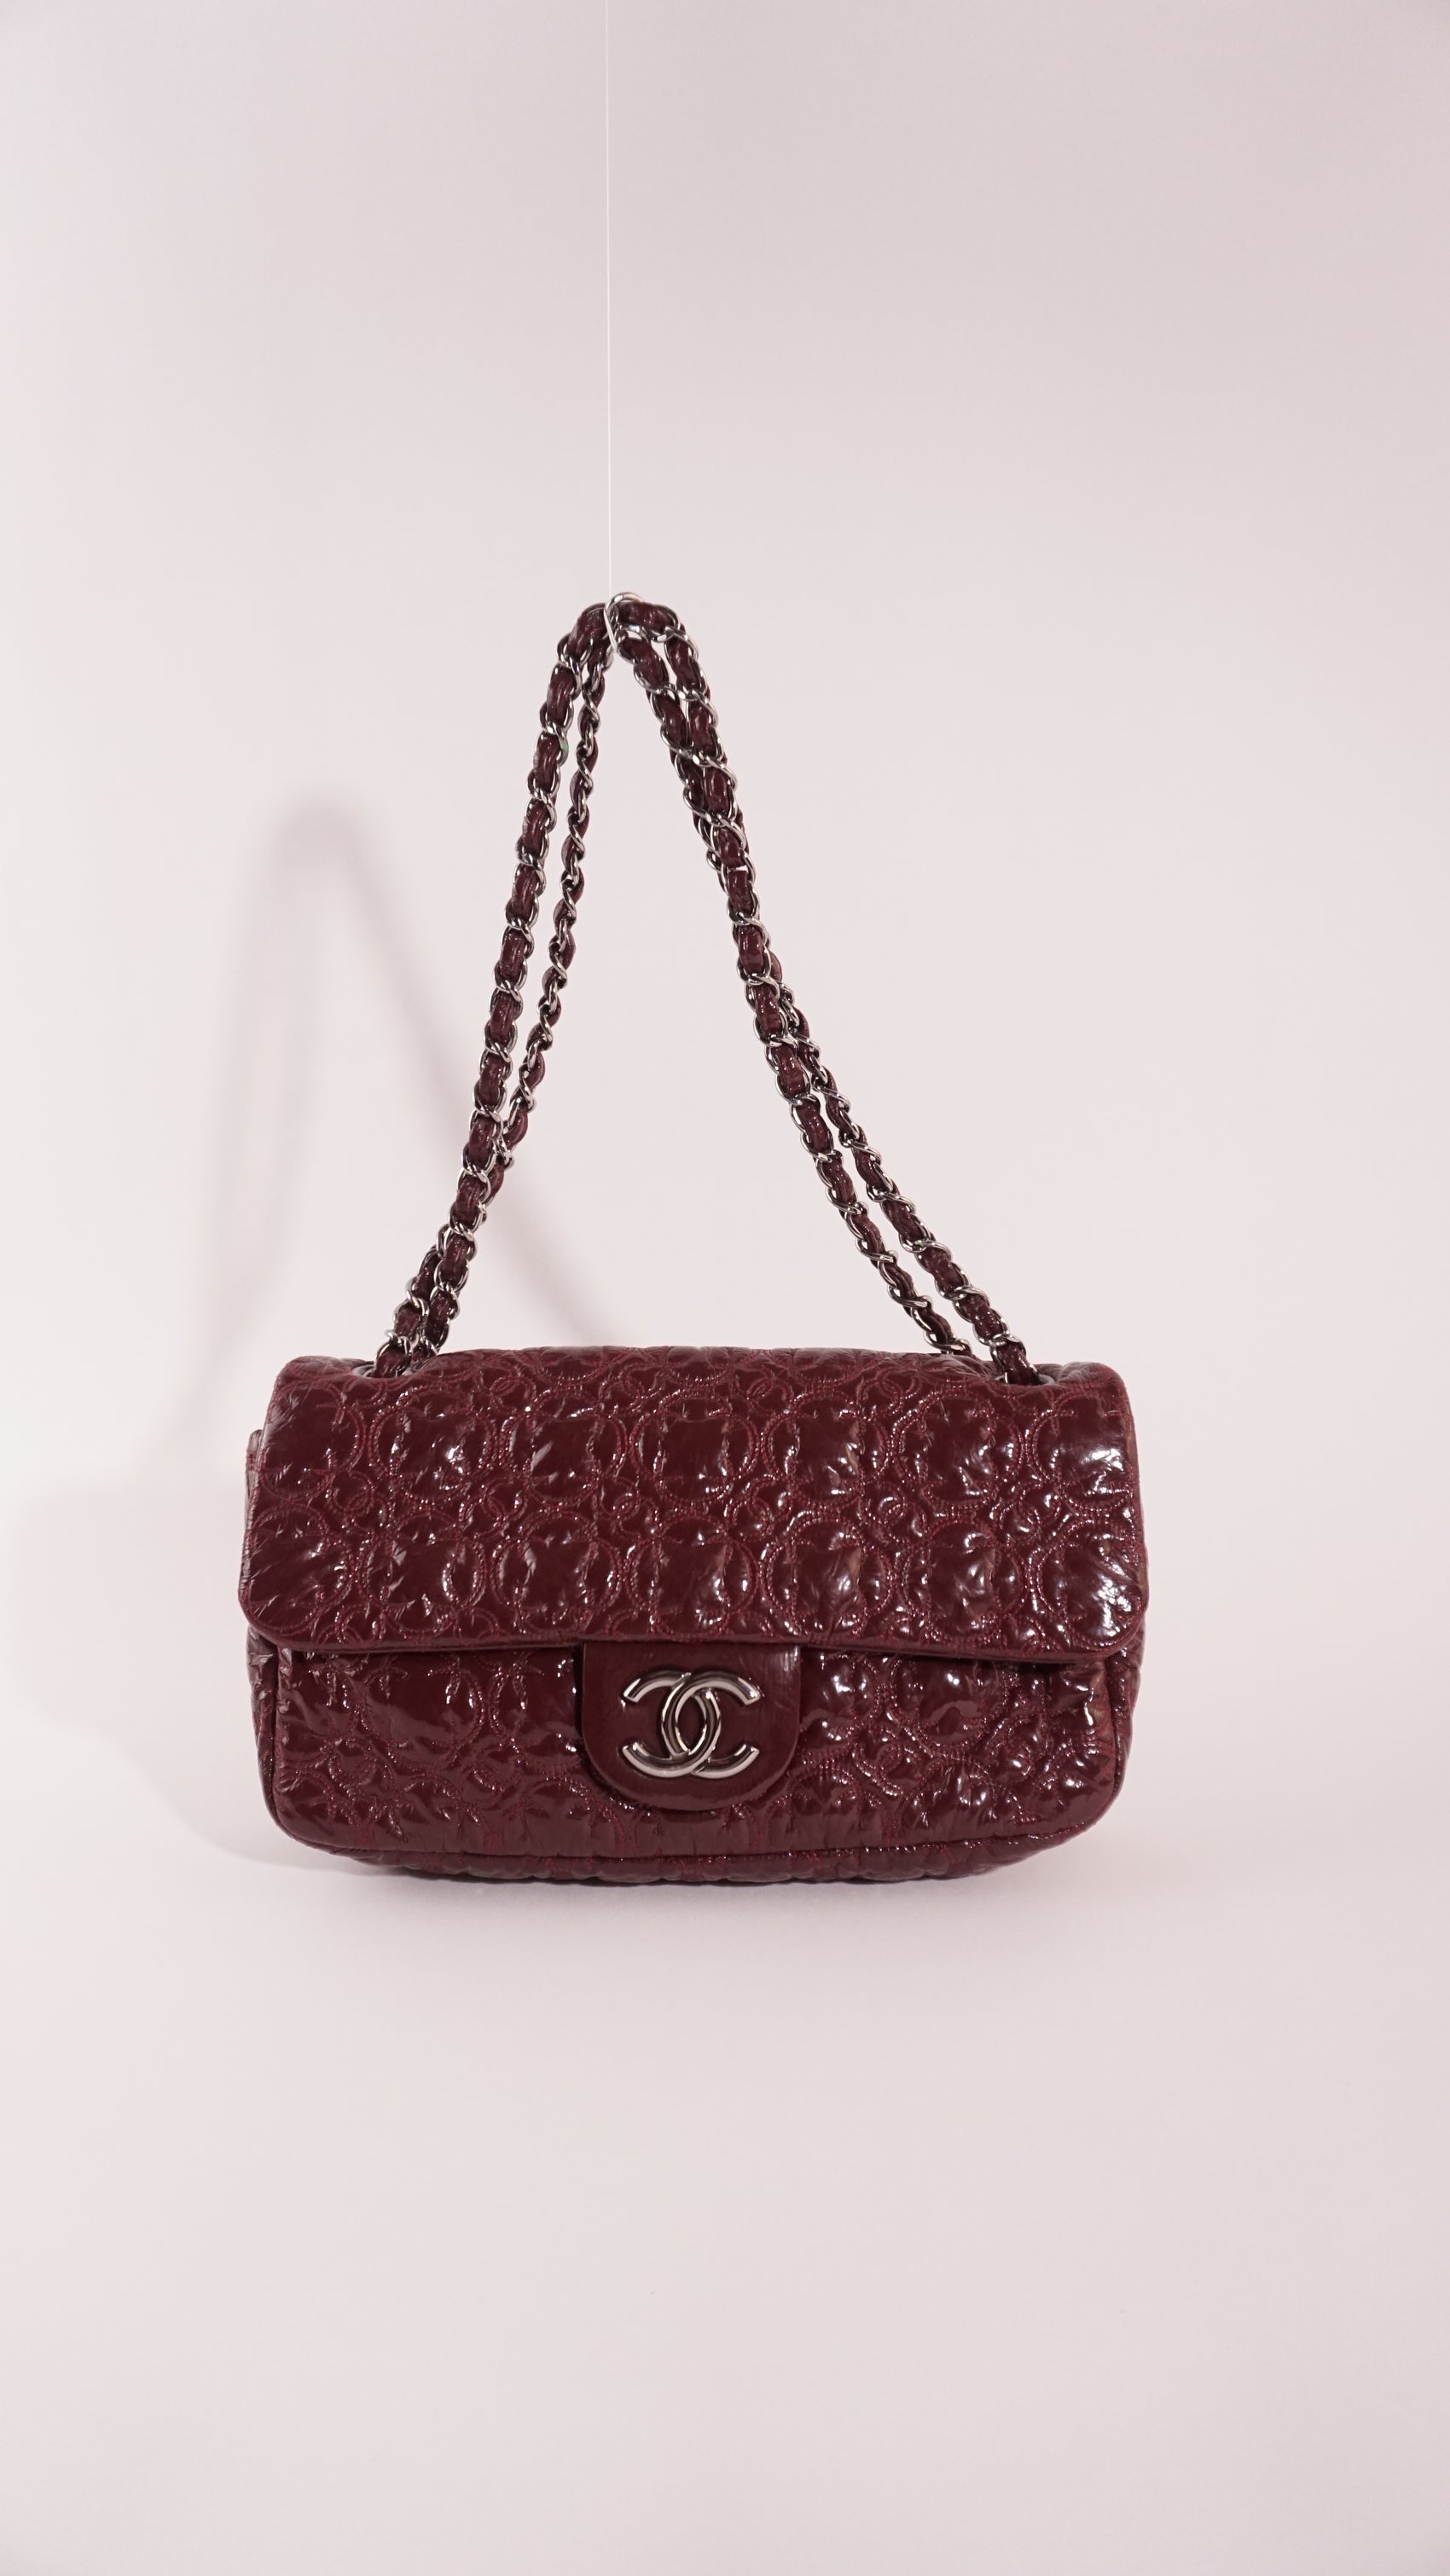 Chanel Red vintage classic flap